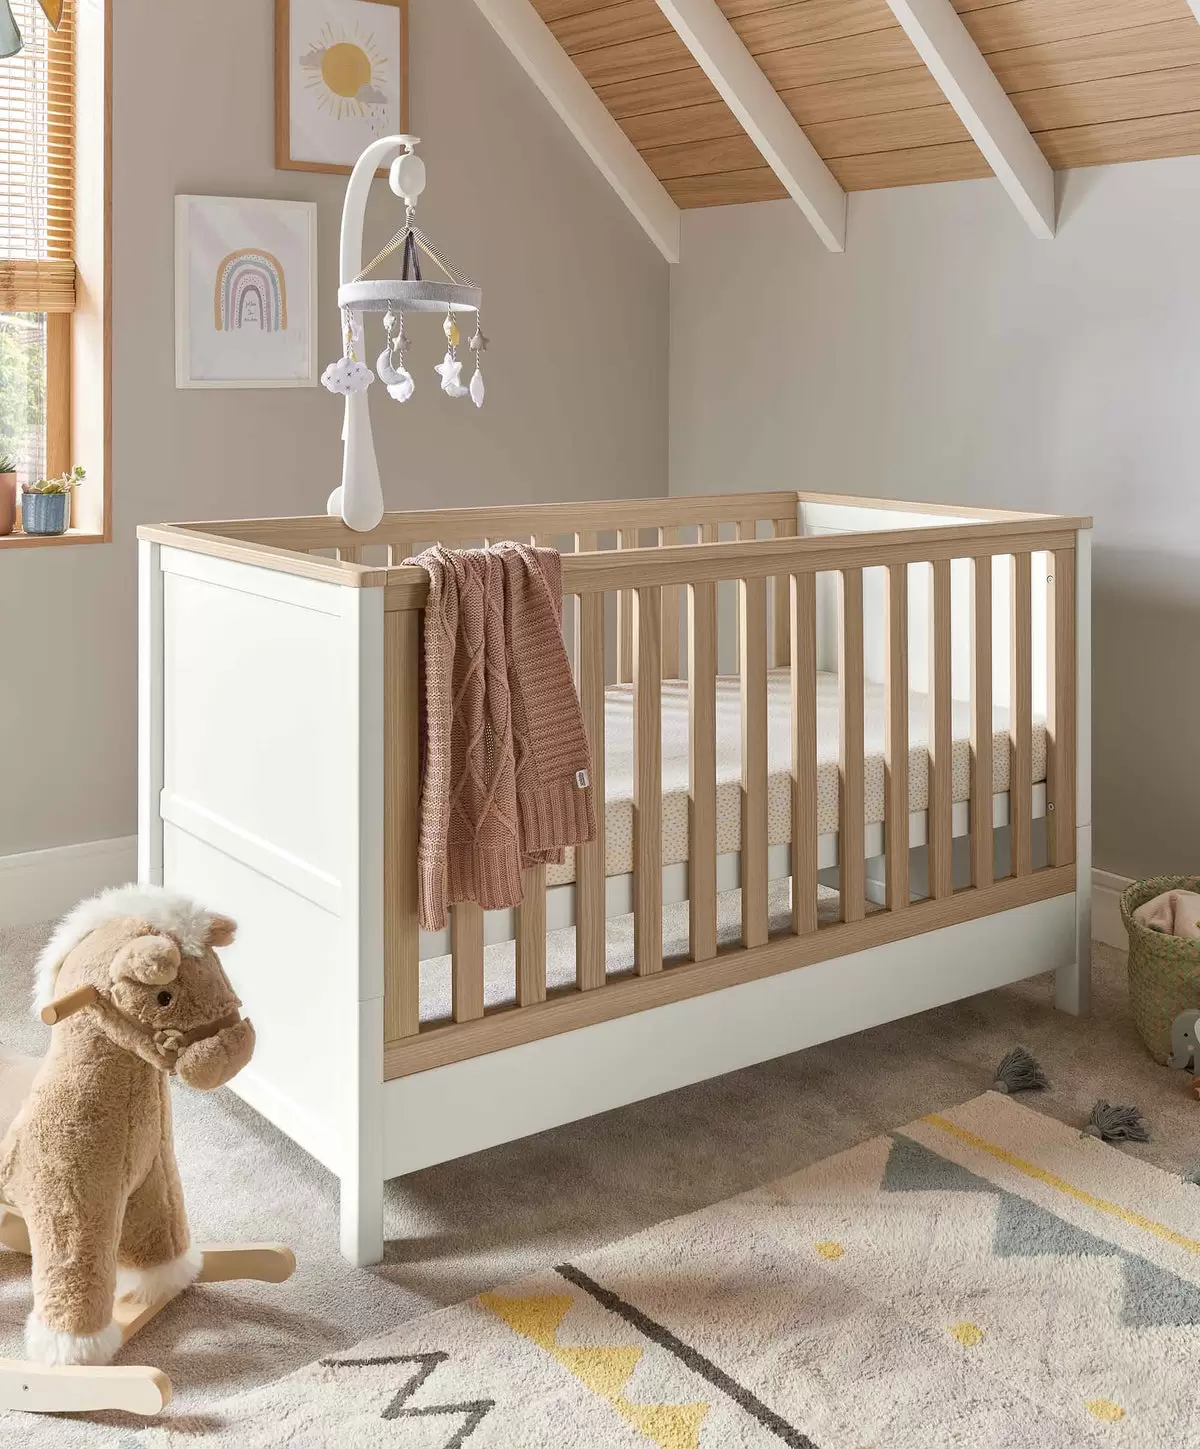 Mamas Papas Cot Beds Harwell Baby Cot Bed White Oak 30983836631205 1200x